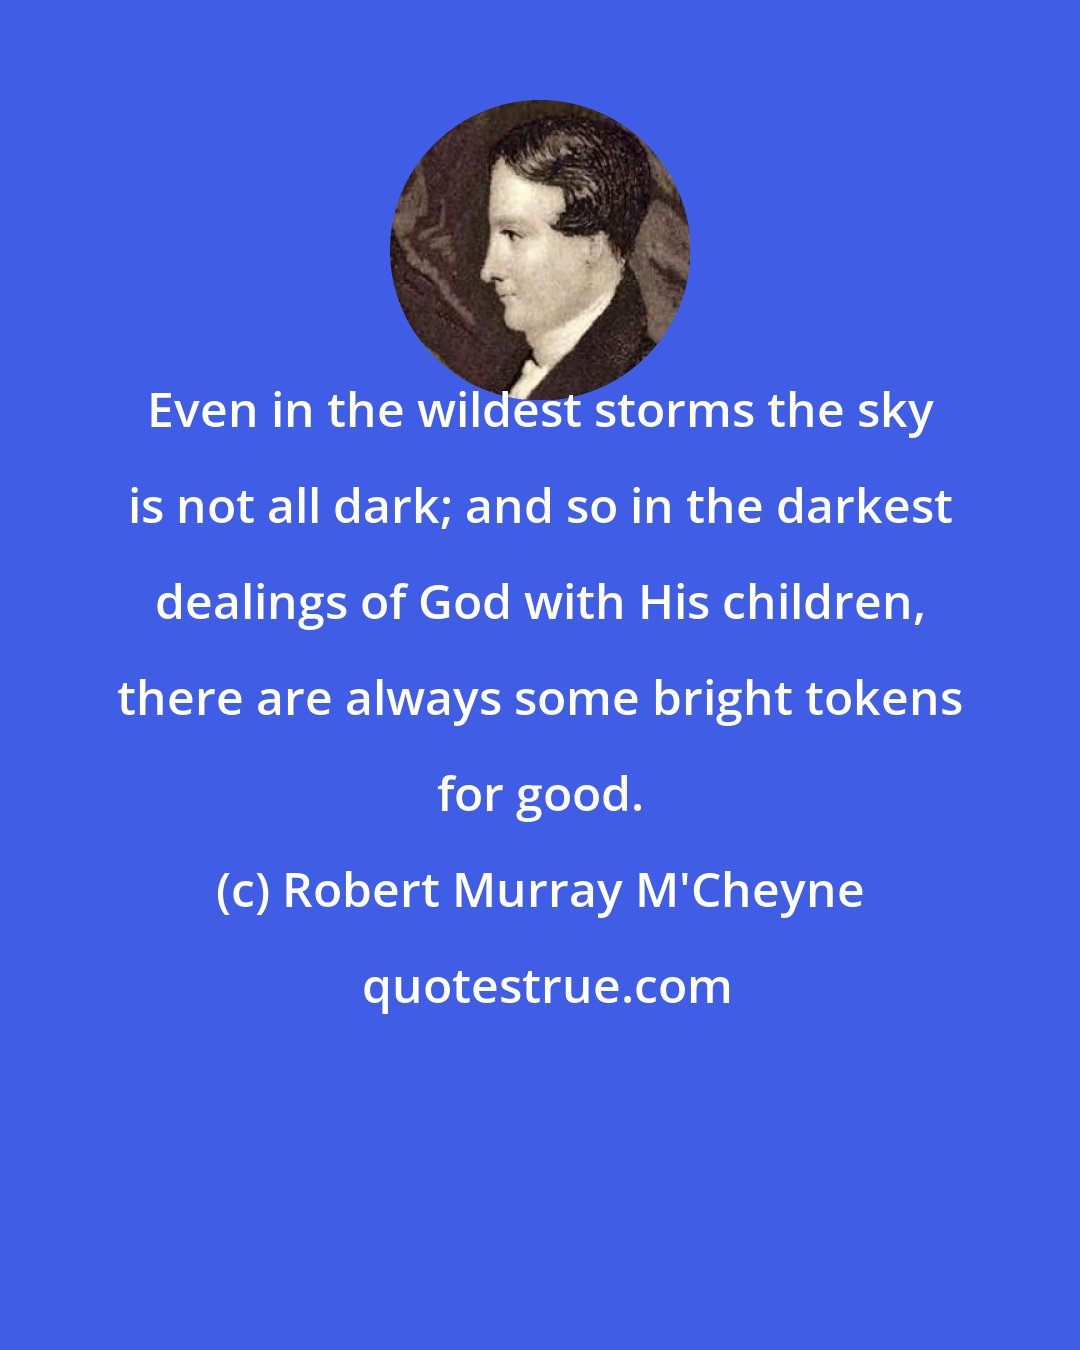 Robert Murray M'Cheyne: Even in the wildest storms the sky is not all dark; and so in the darkest dealings of God with His children, there are always some bright tokens for good.